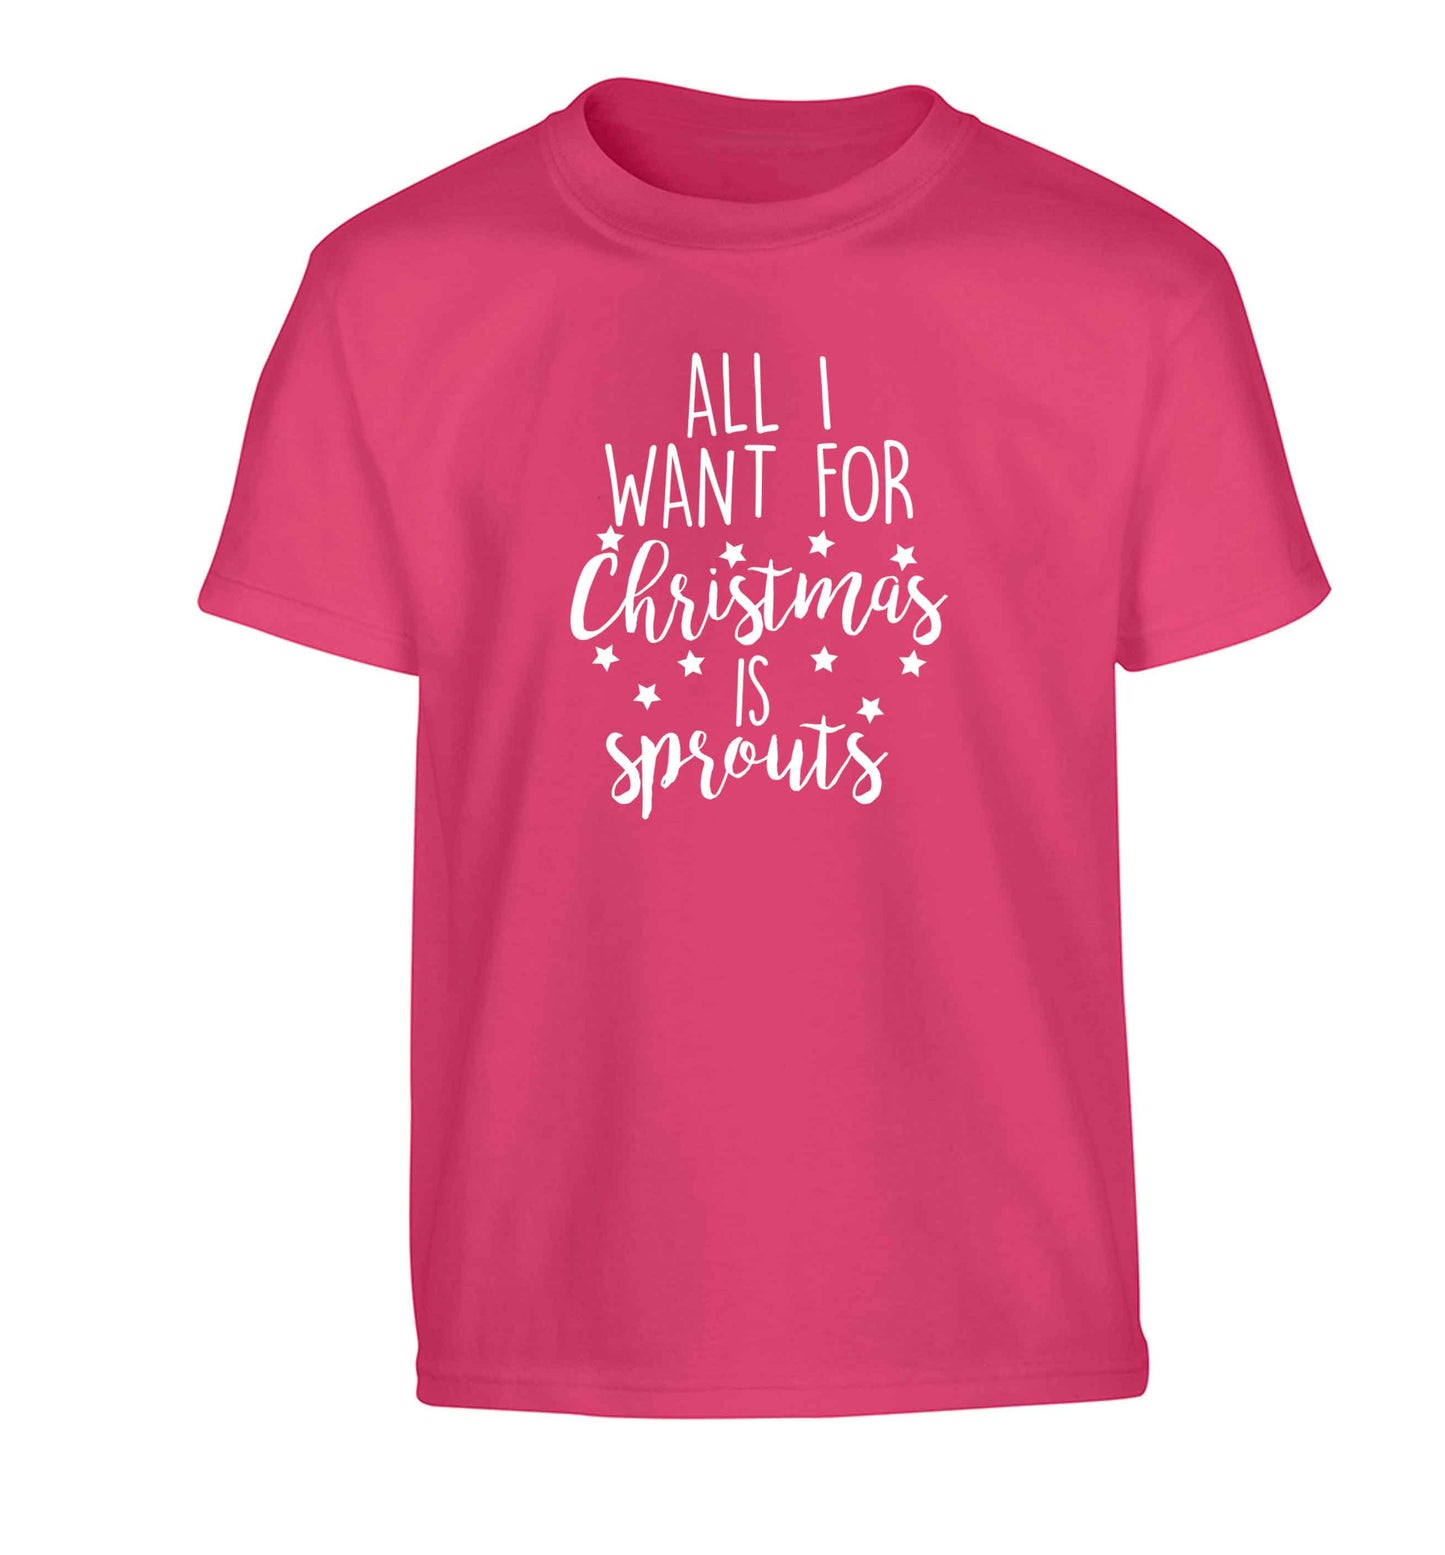 All I want for Christmas is sprouts Children's pink Tshirt 12-13 Years